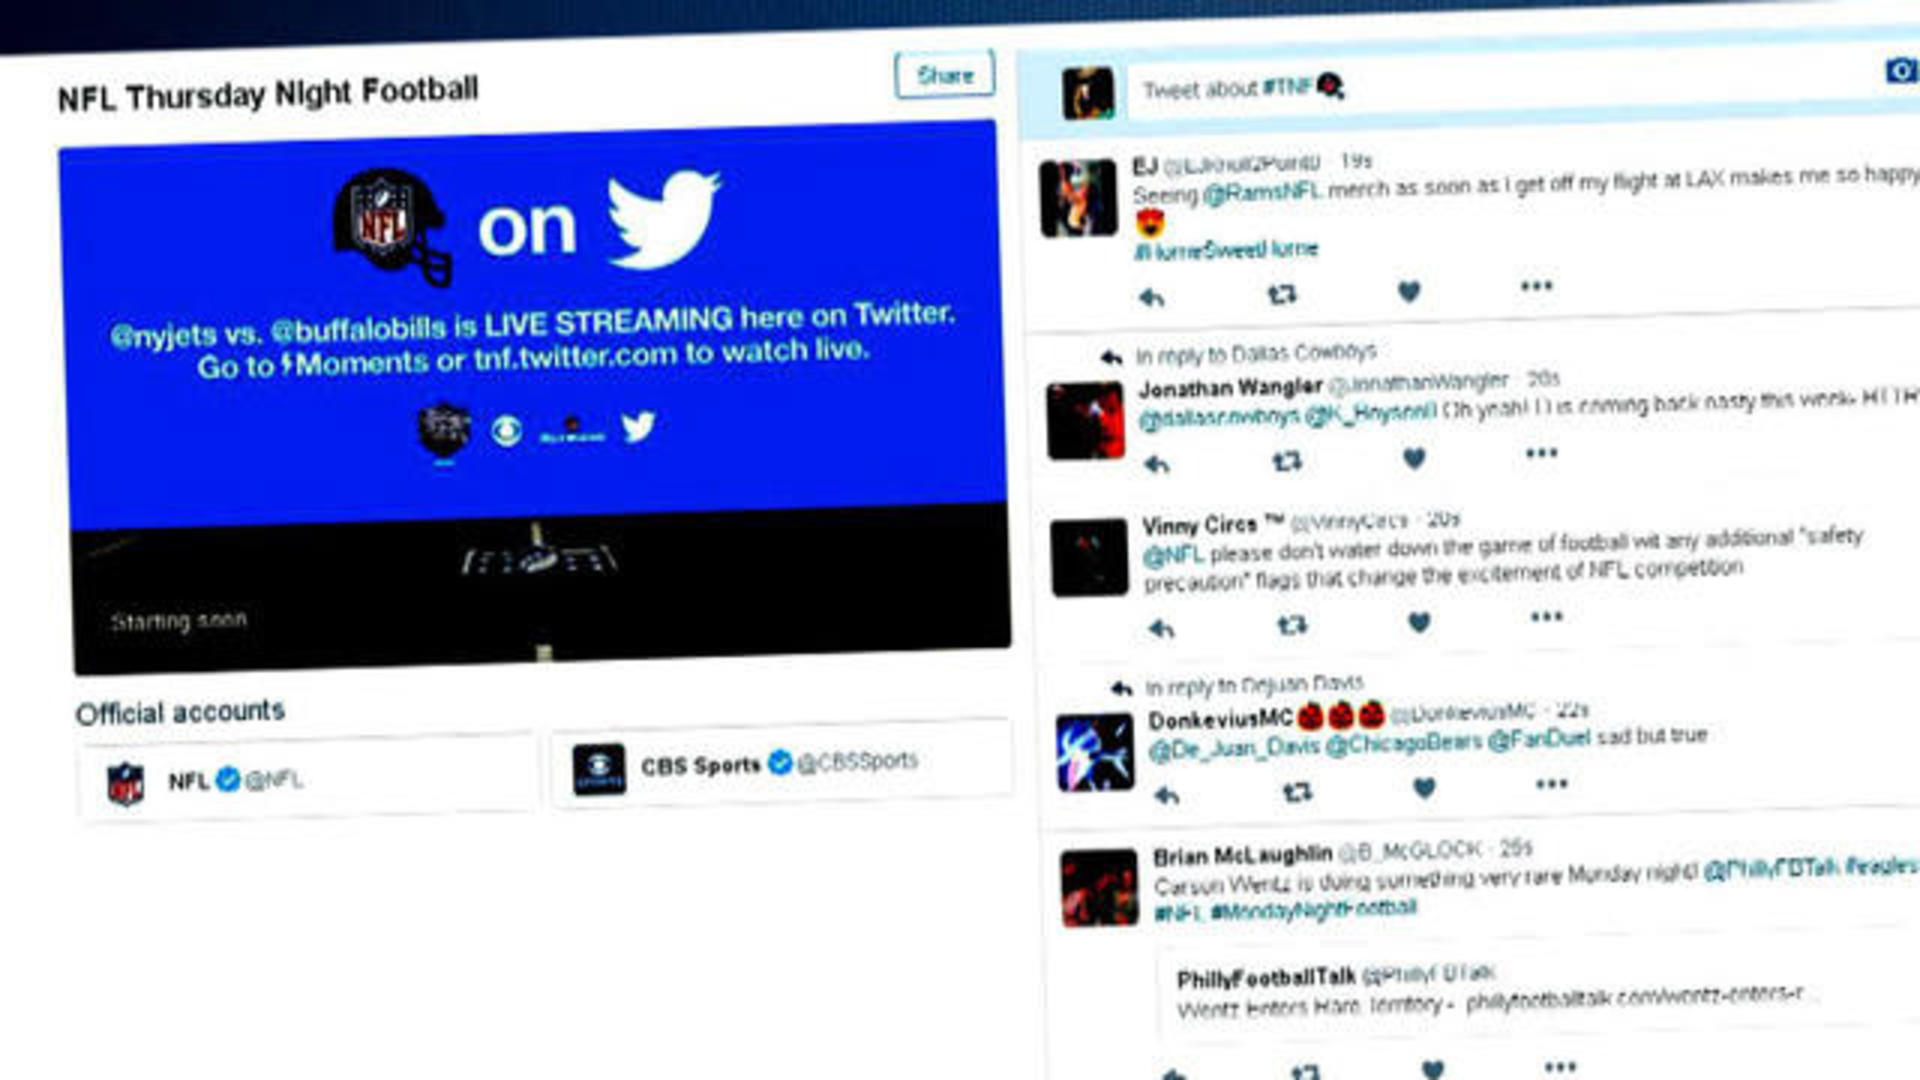 Twitter teams up with NFL for live stream - CBS News